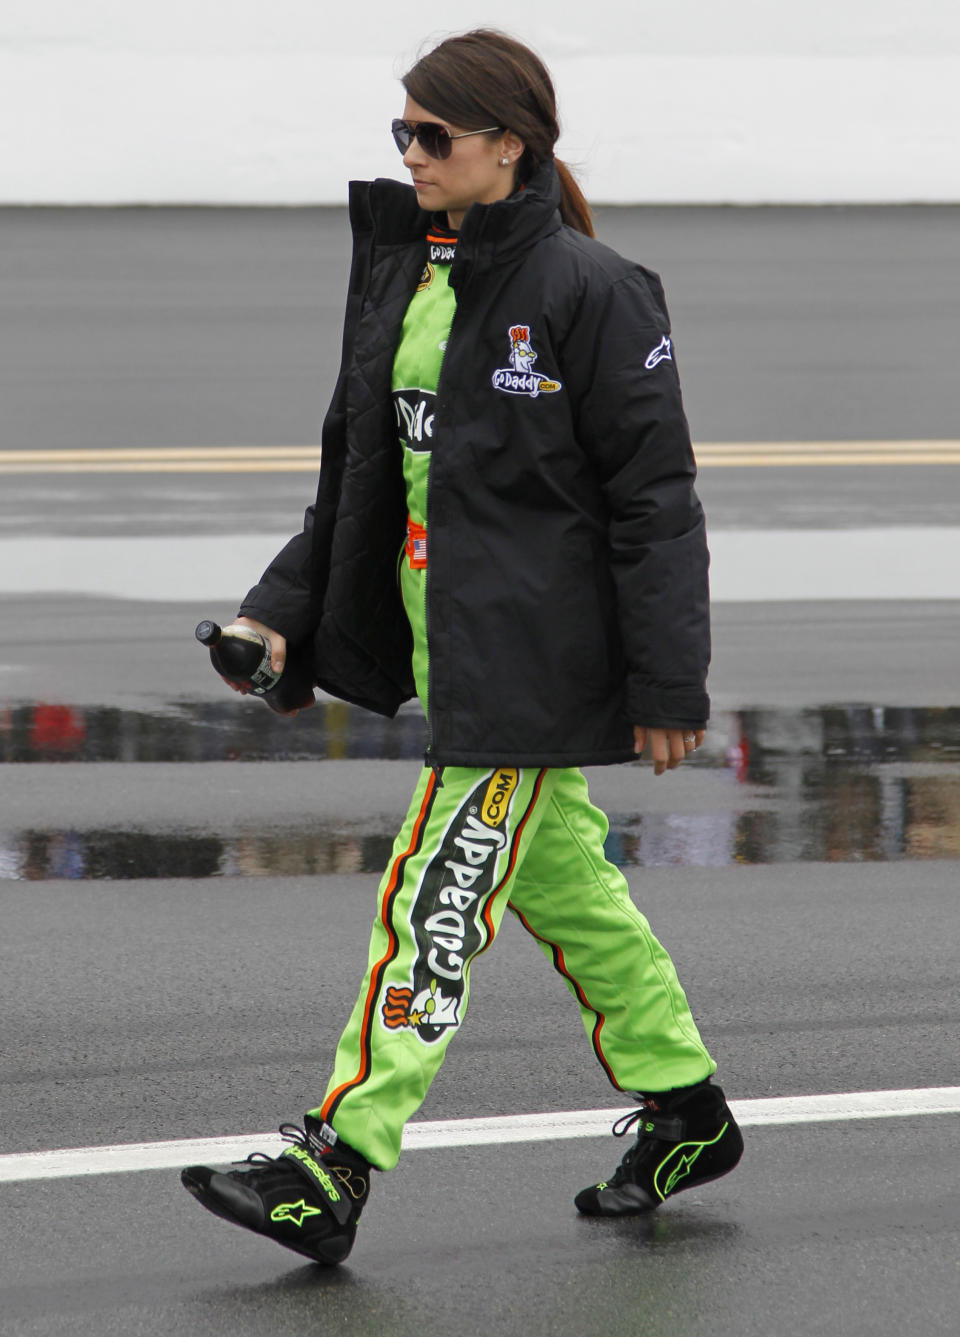 Danica Patrick walks down pit road during driver introductions before the NASCAR Daytona 500 Sprint Cup series auto race in Daytona Beach, Fla., Sunday, Feb. 26, 2012. (AP Photo/Terry Renna)